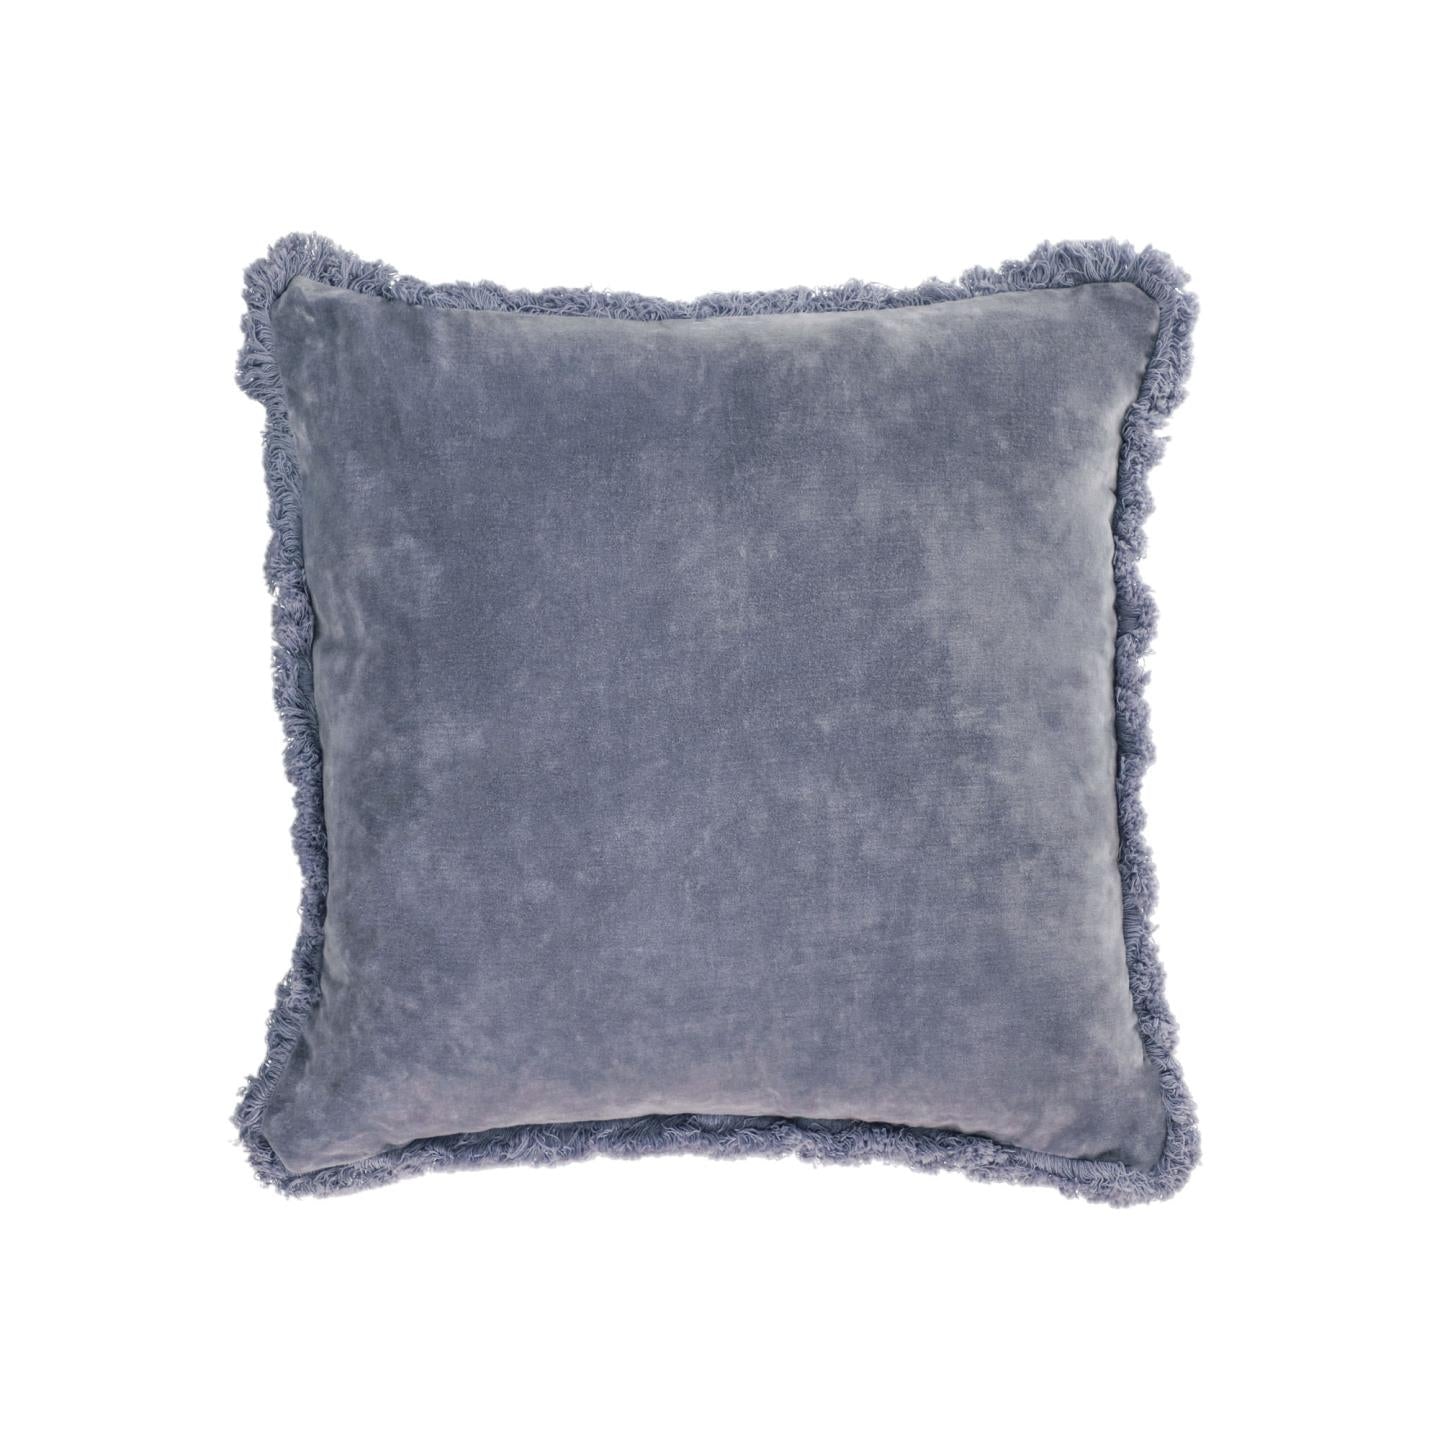 Cedella 100% cotton velvet cushion cover with fringe in blue 45 x 45 cm